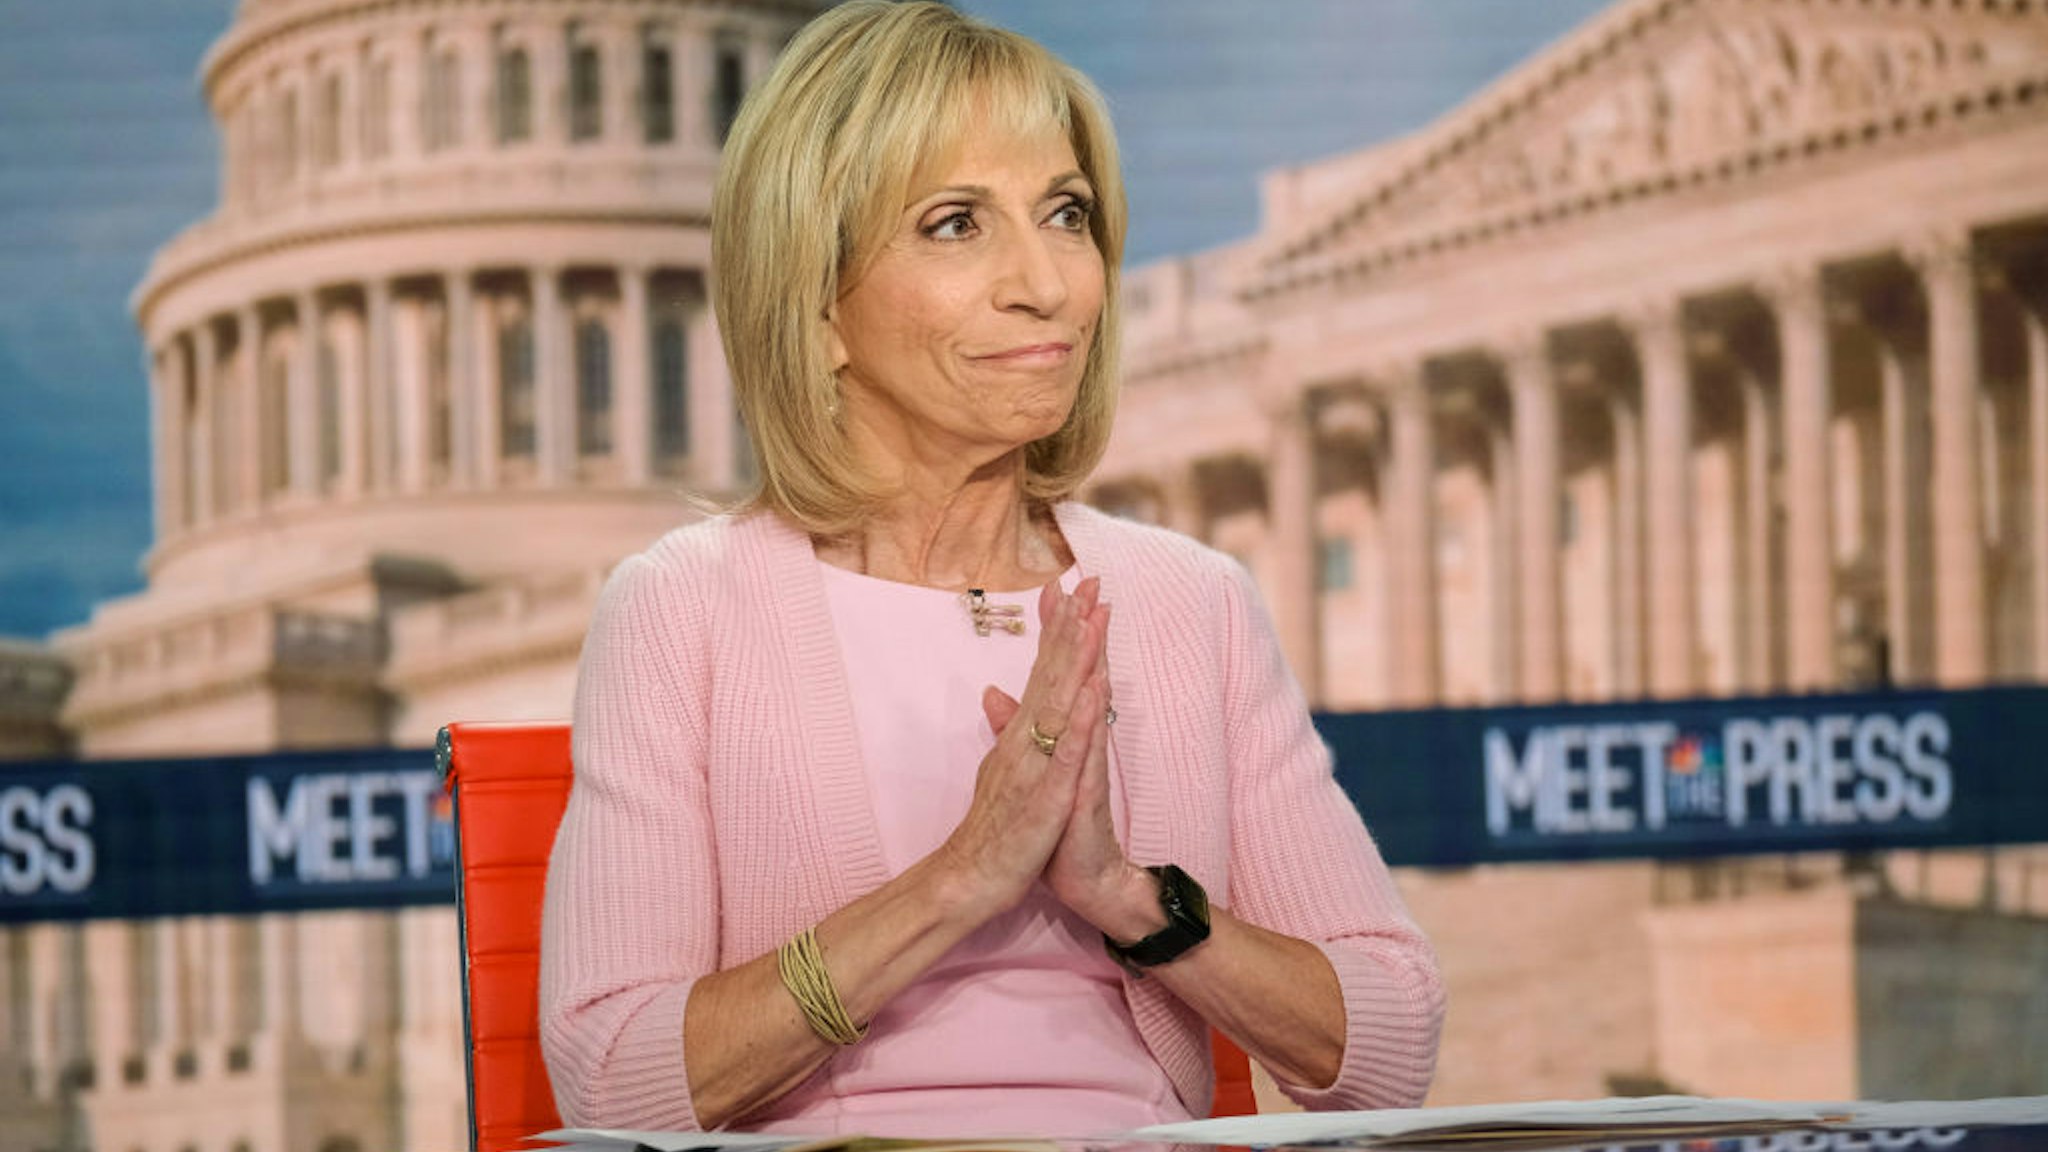 MEET THE PRESS -- Pictured: Guest Moderator and NBC News Chief Washington Correspondent and Chief Foreign Affairs Correspondent Andrea Mitchell appears on Meet the Press in Washington, D.C. Sunday, Aug. 14, 2022. -- (Photo by: William B. Plowman/NBC via Getty Images)